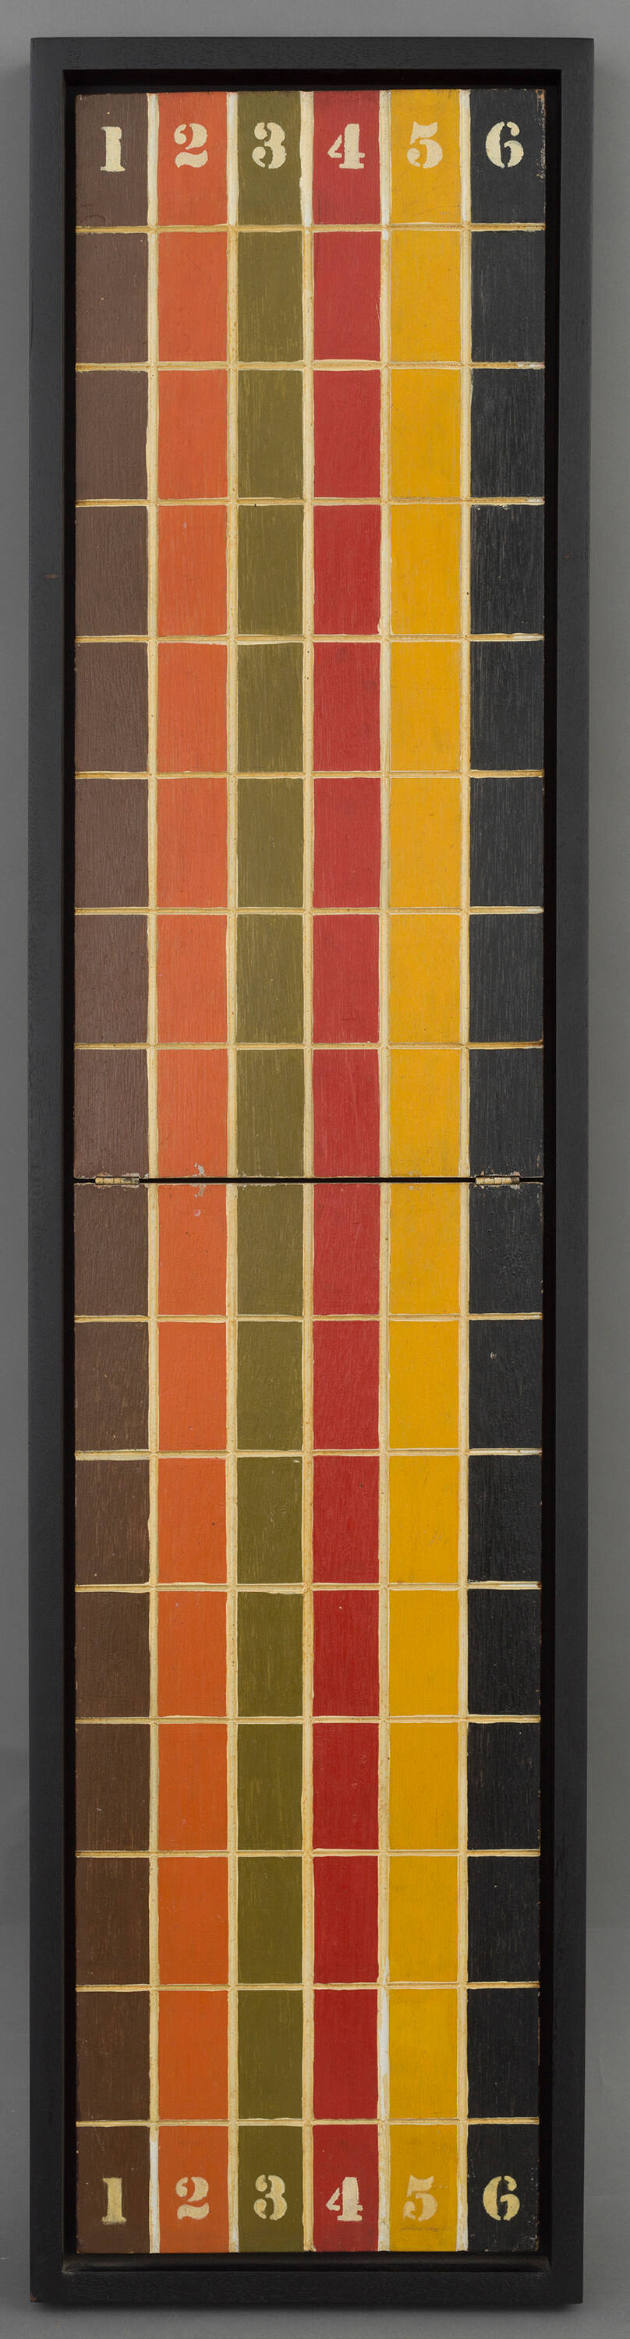 Artist unidentified, “Gameboard- unknown game”, United States, n.d., Wood, paint, 50 × 10 ¾ in.…